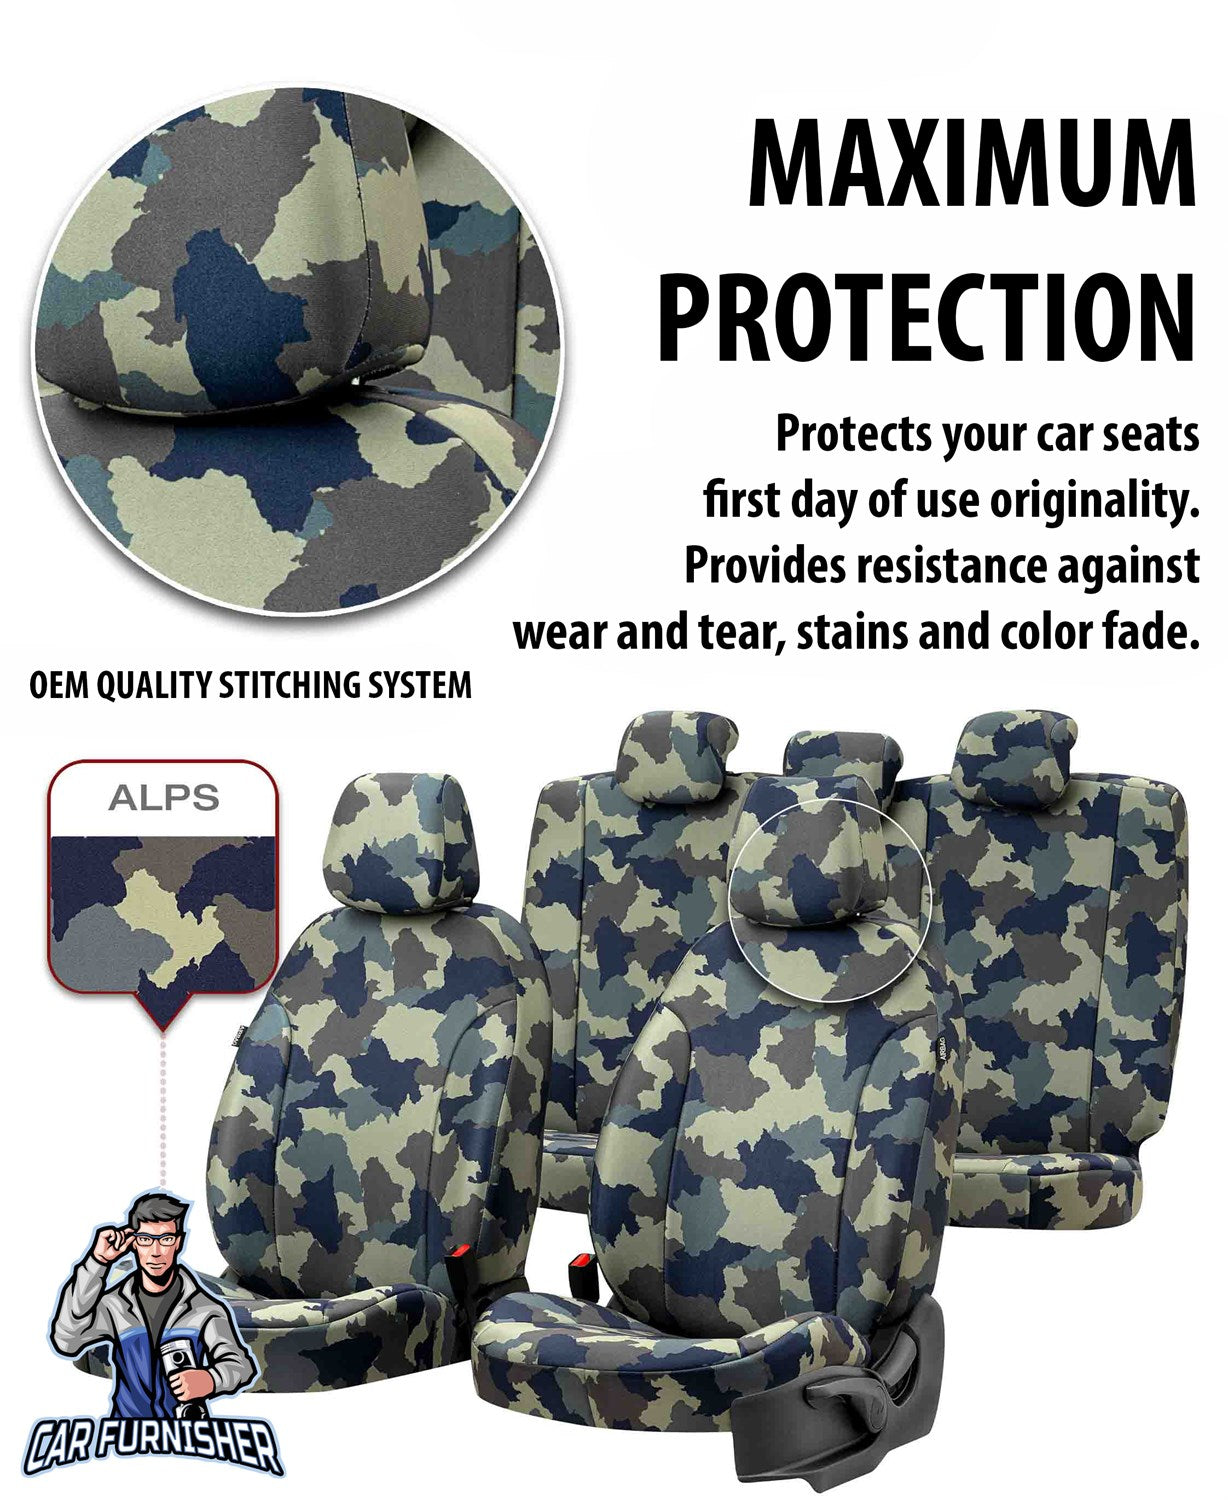 Ford S-Max Seat Covers Camouflage Waterproof Design Gobi Camo Waterproof Fabric